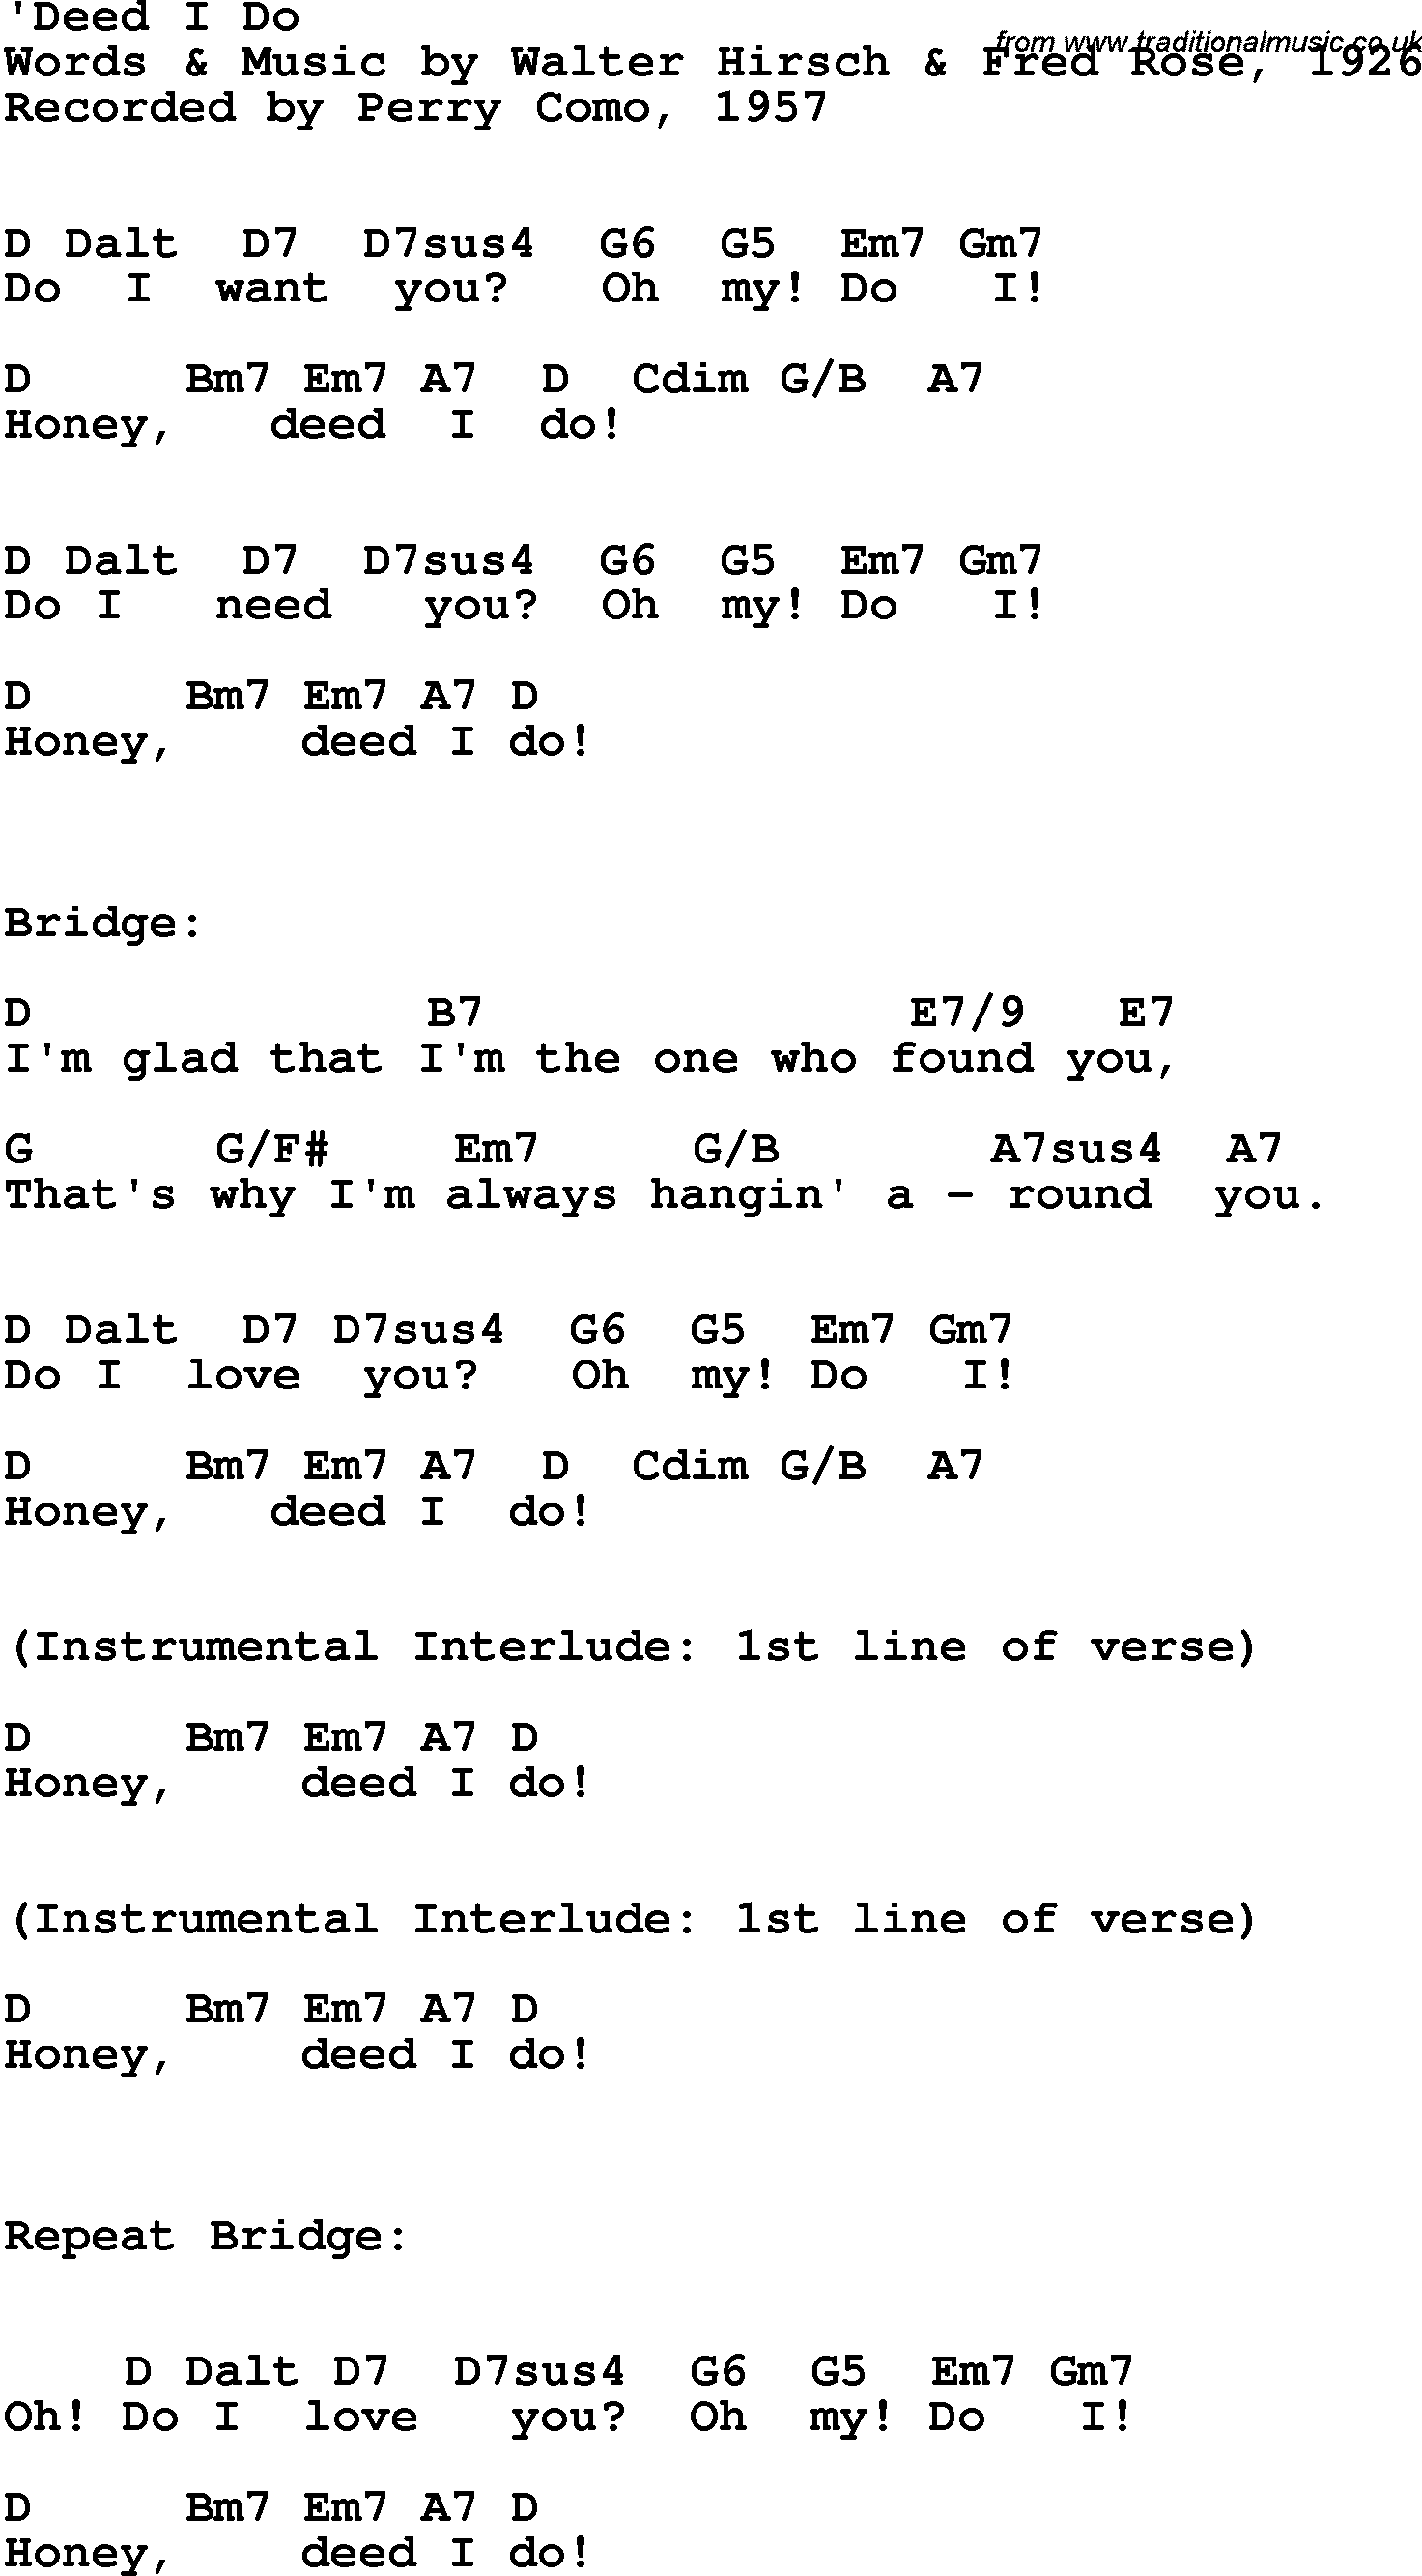 Song Lyrics with guitar chords for 'Deed I Do - Perry Como, 1957